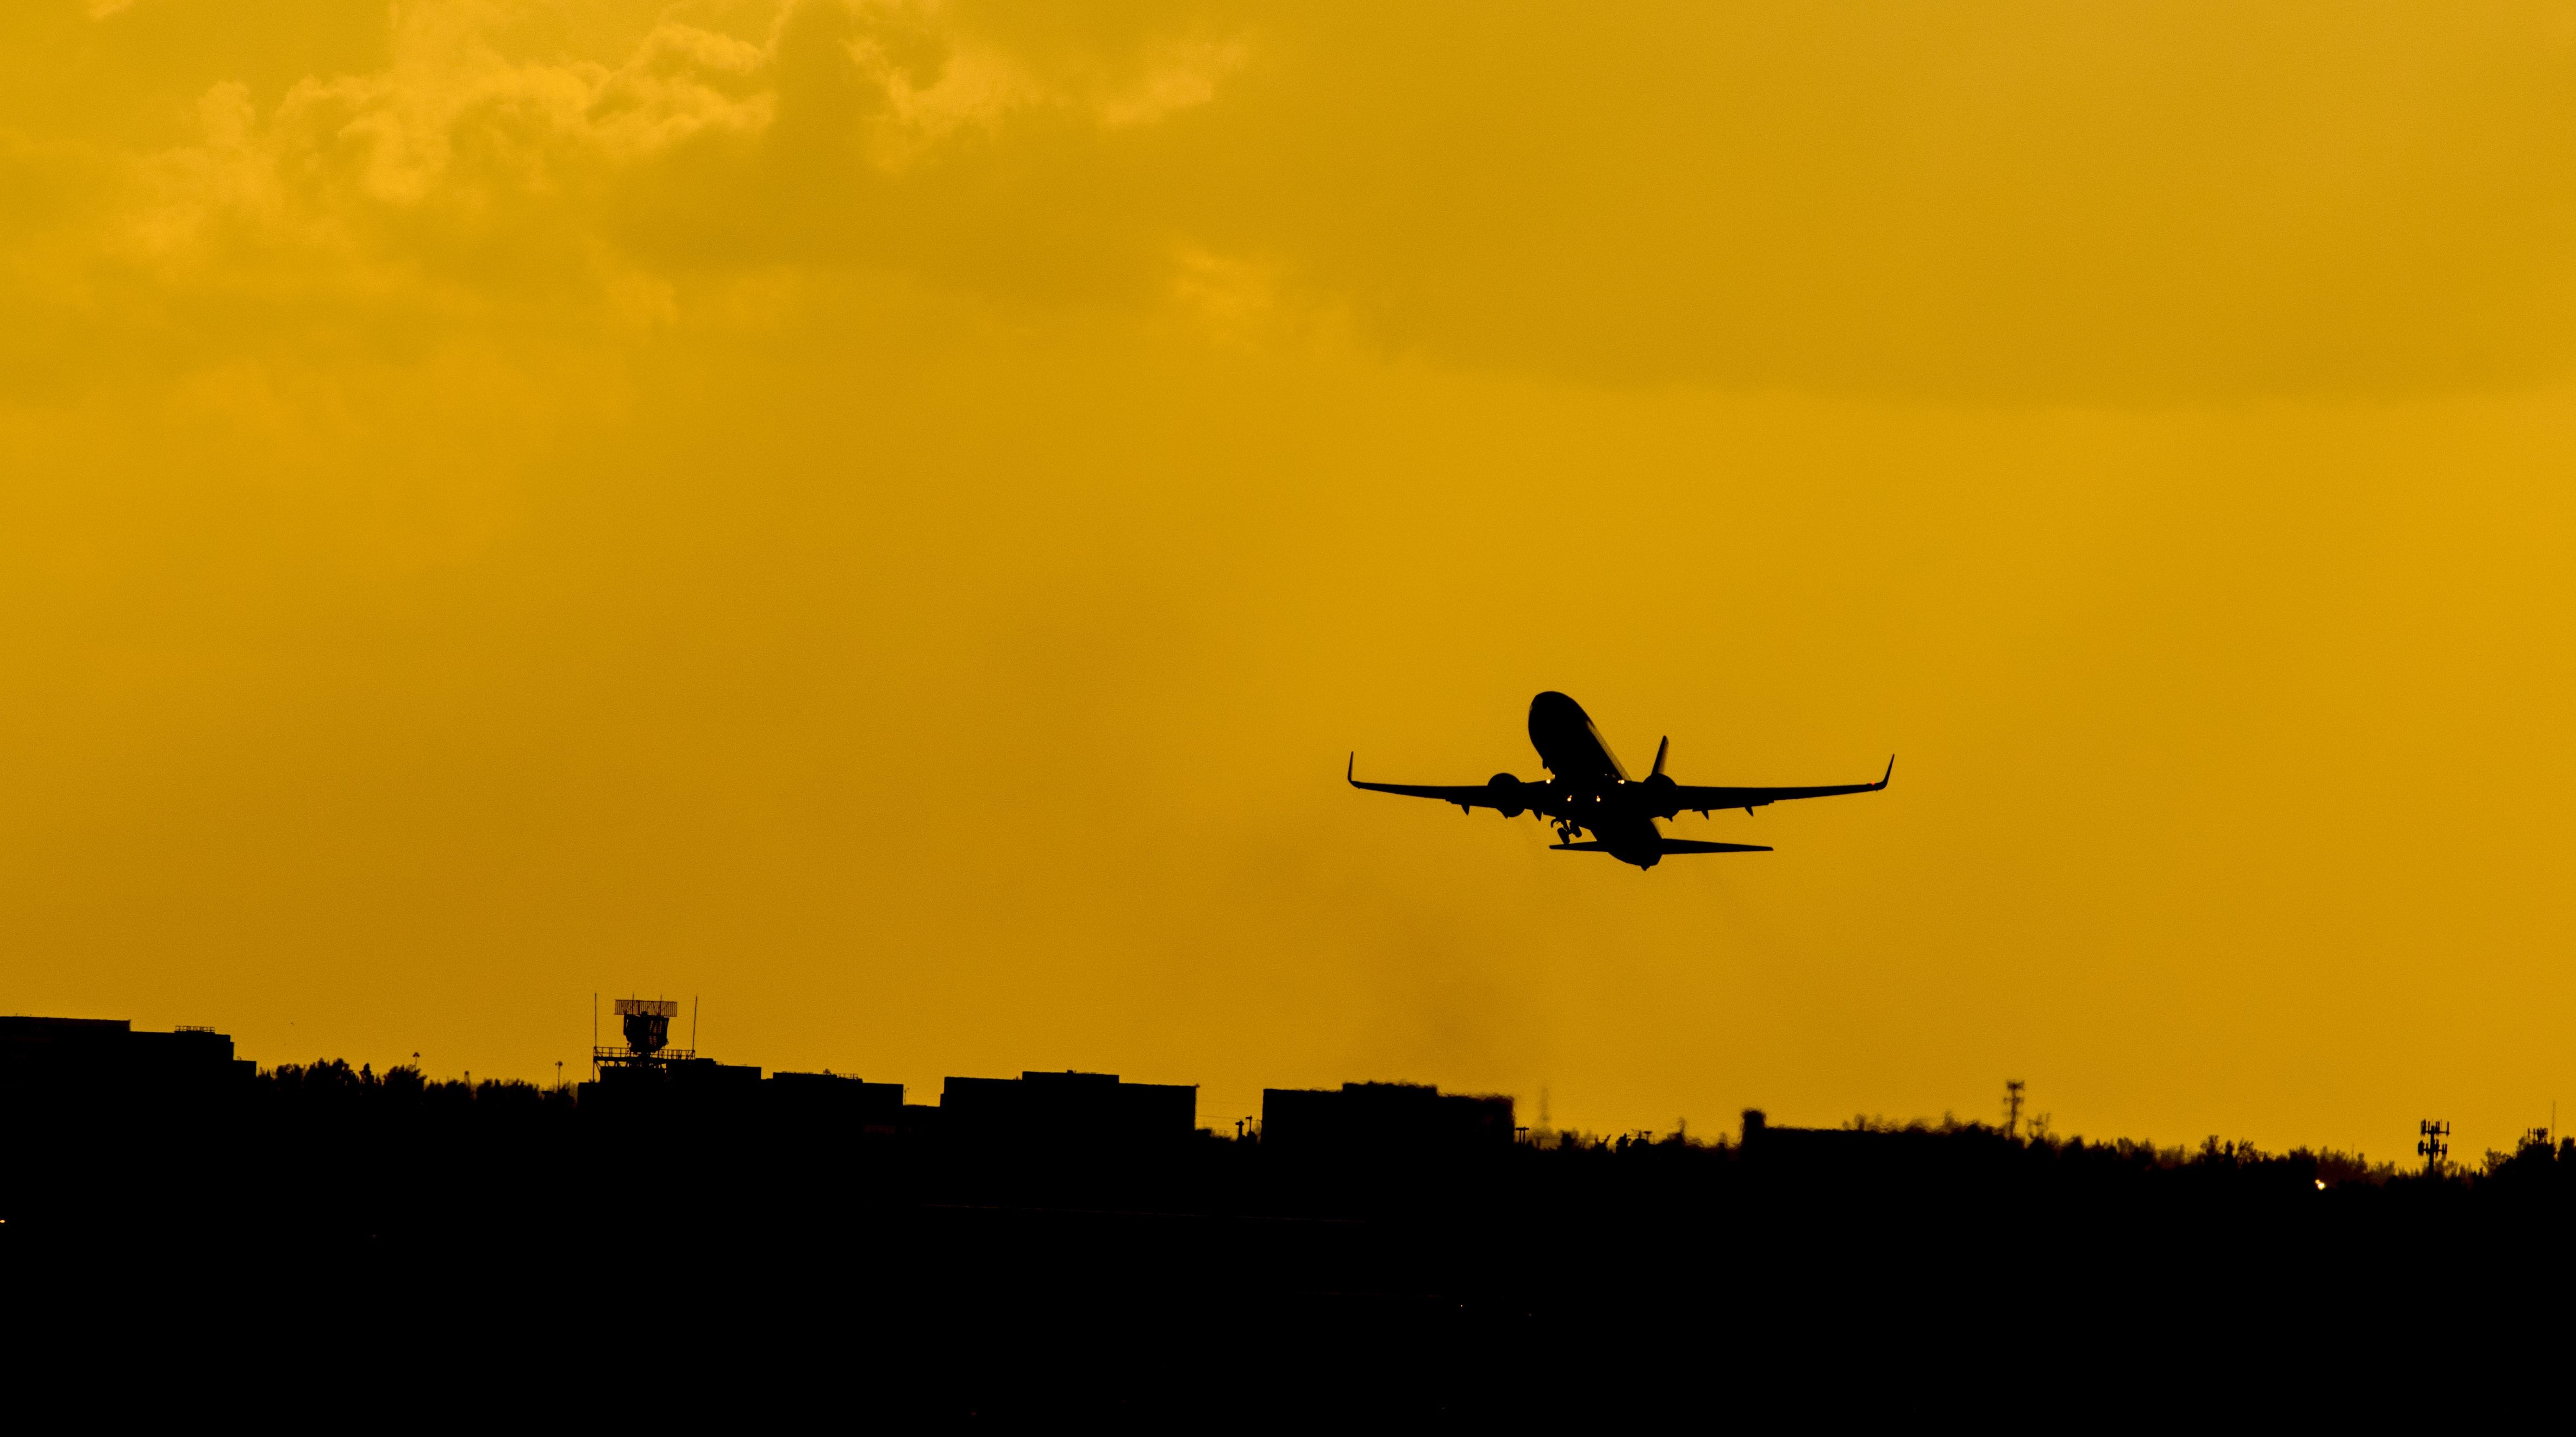 A silhouette of an airplane, taking off into the sunset